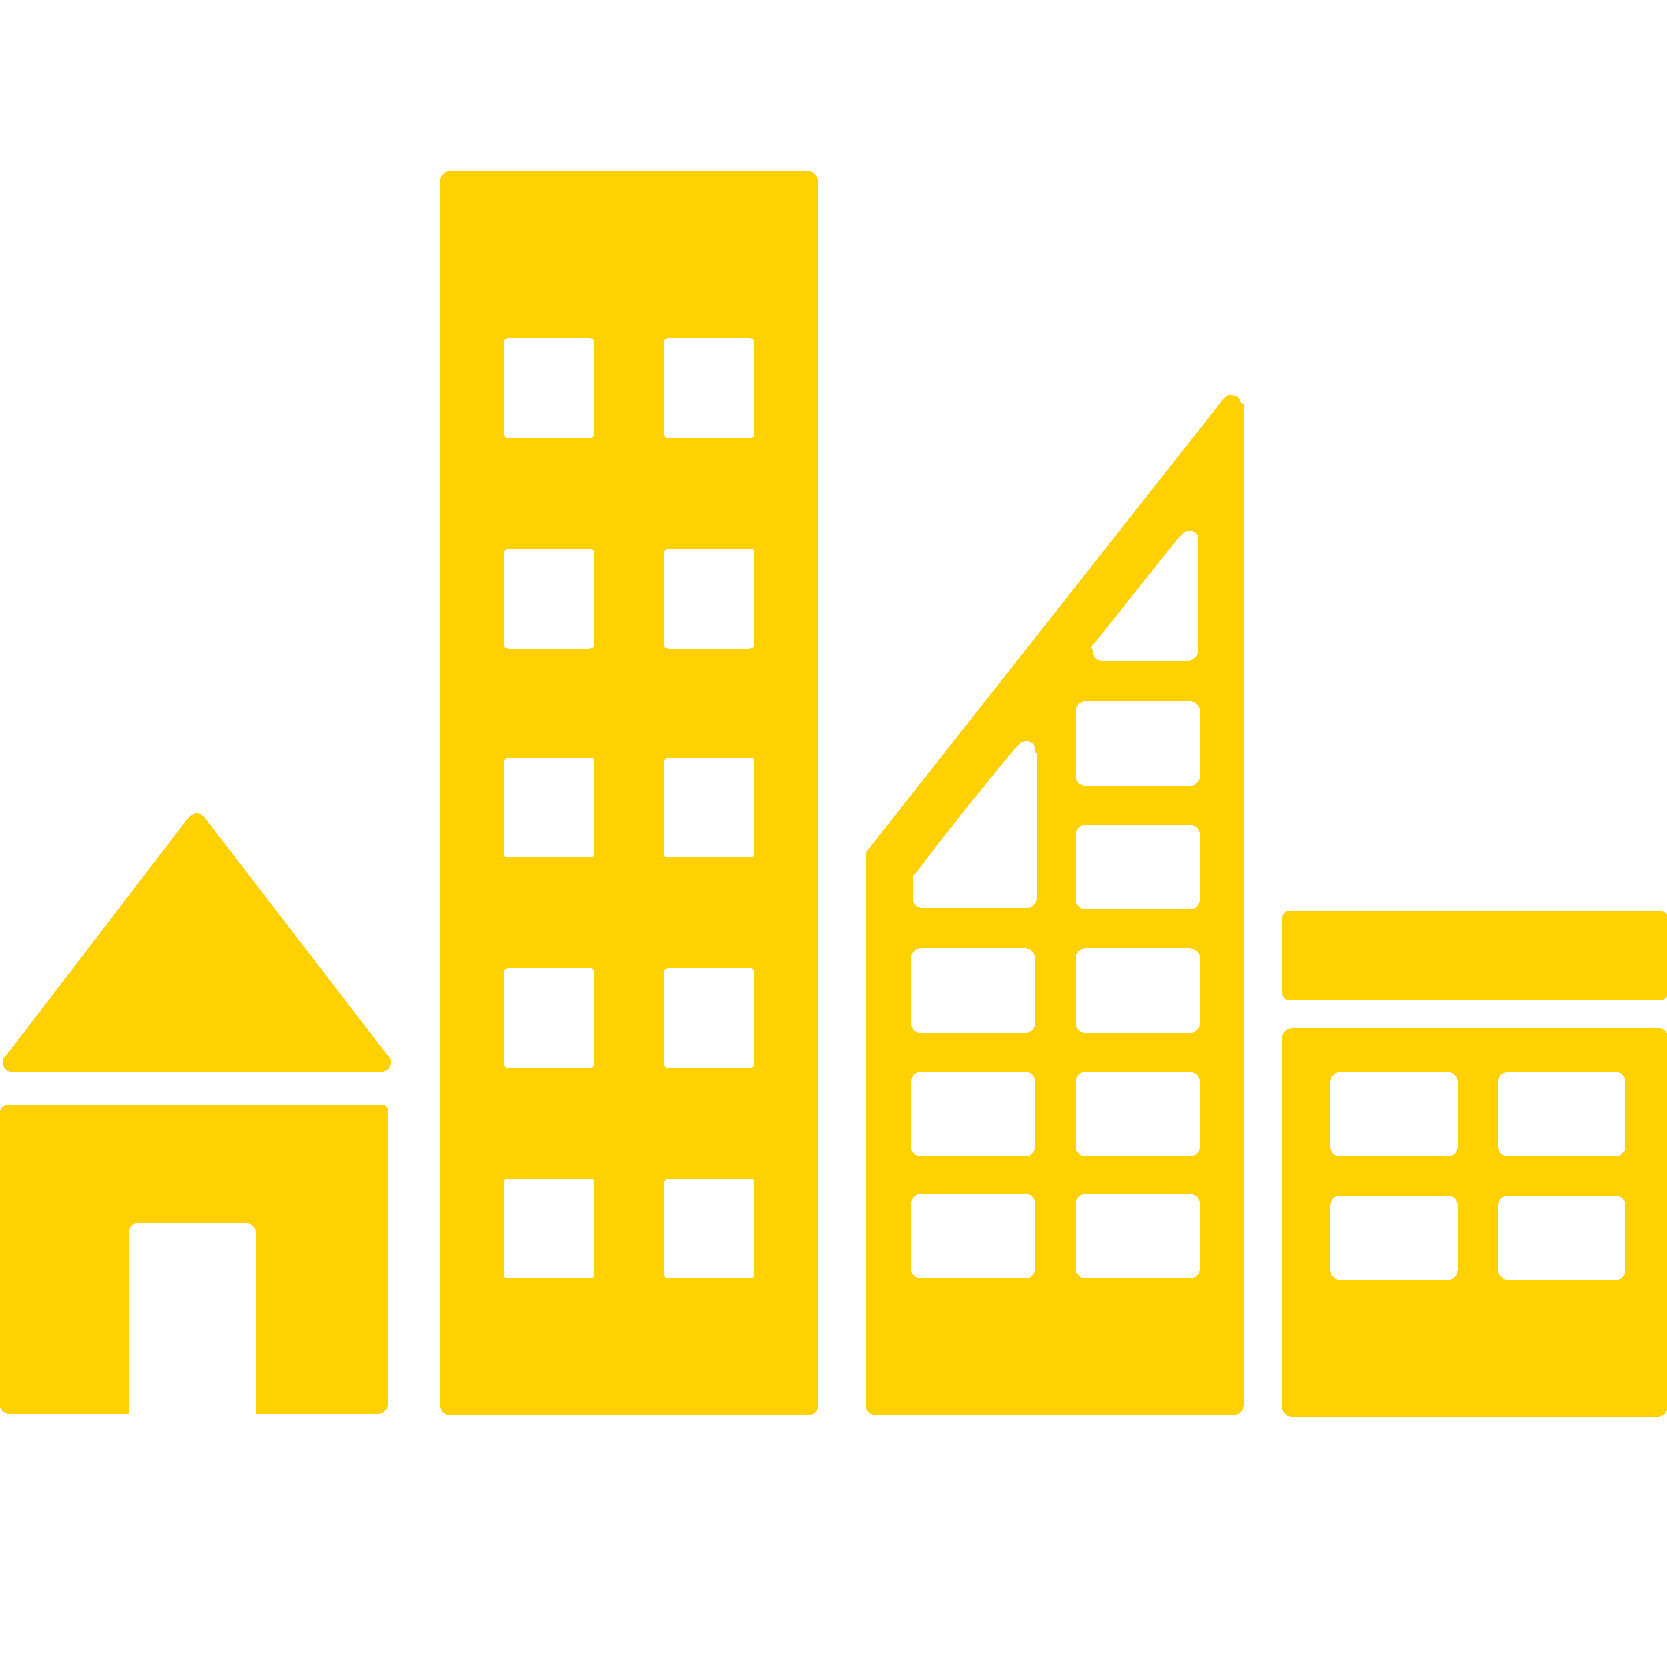 Graphic of four building representations within a community from a house to a high rise office building